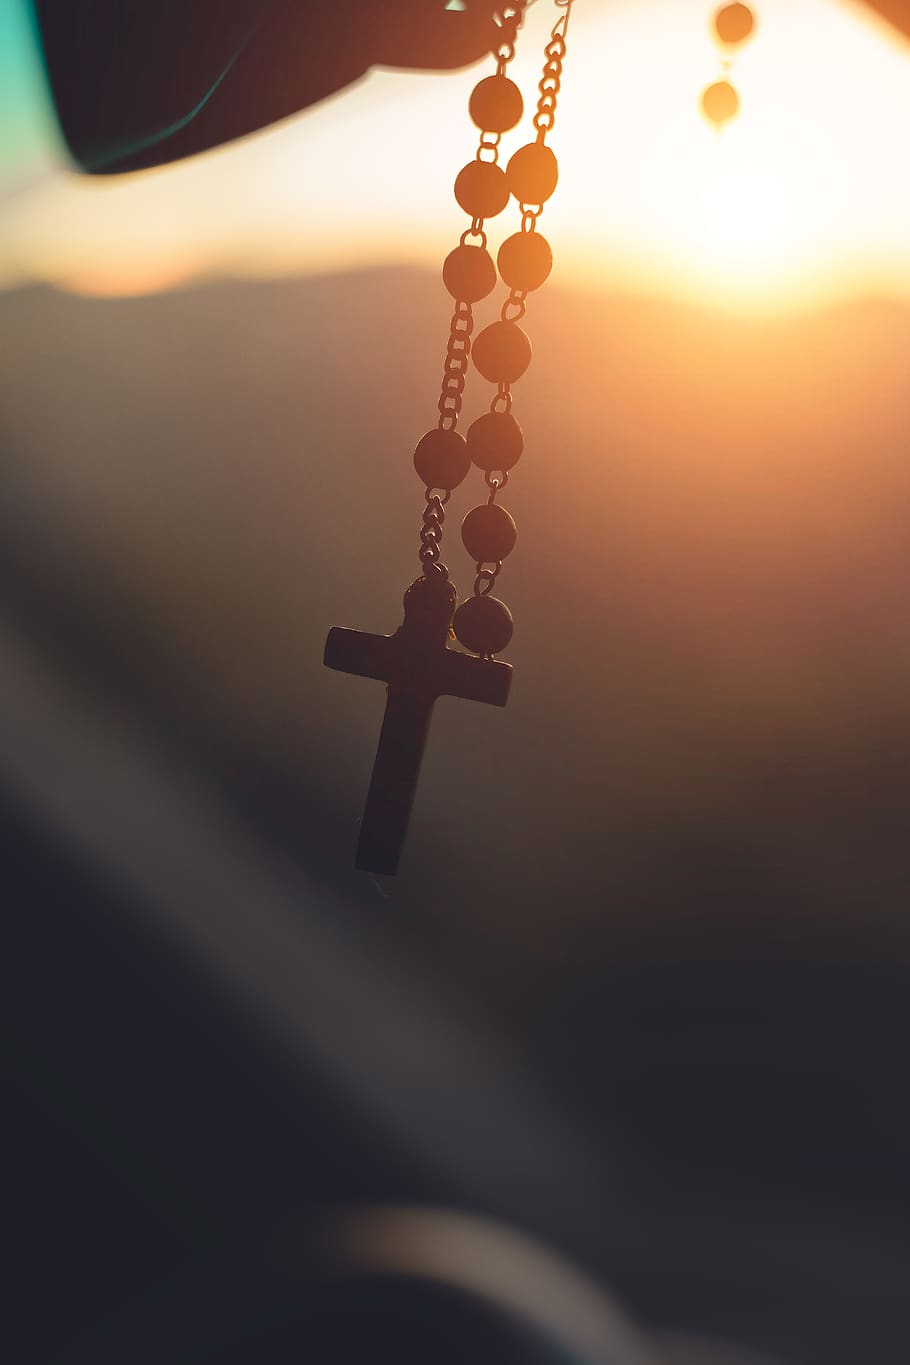 Silhouette Photography of Hanging Rosary, art, blur, bright, catholic